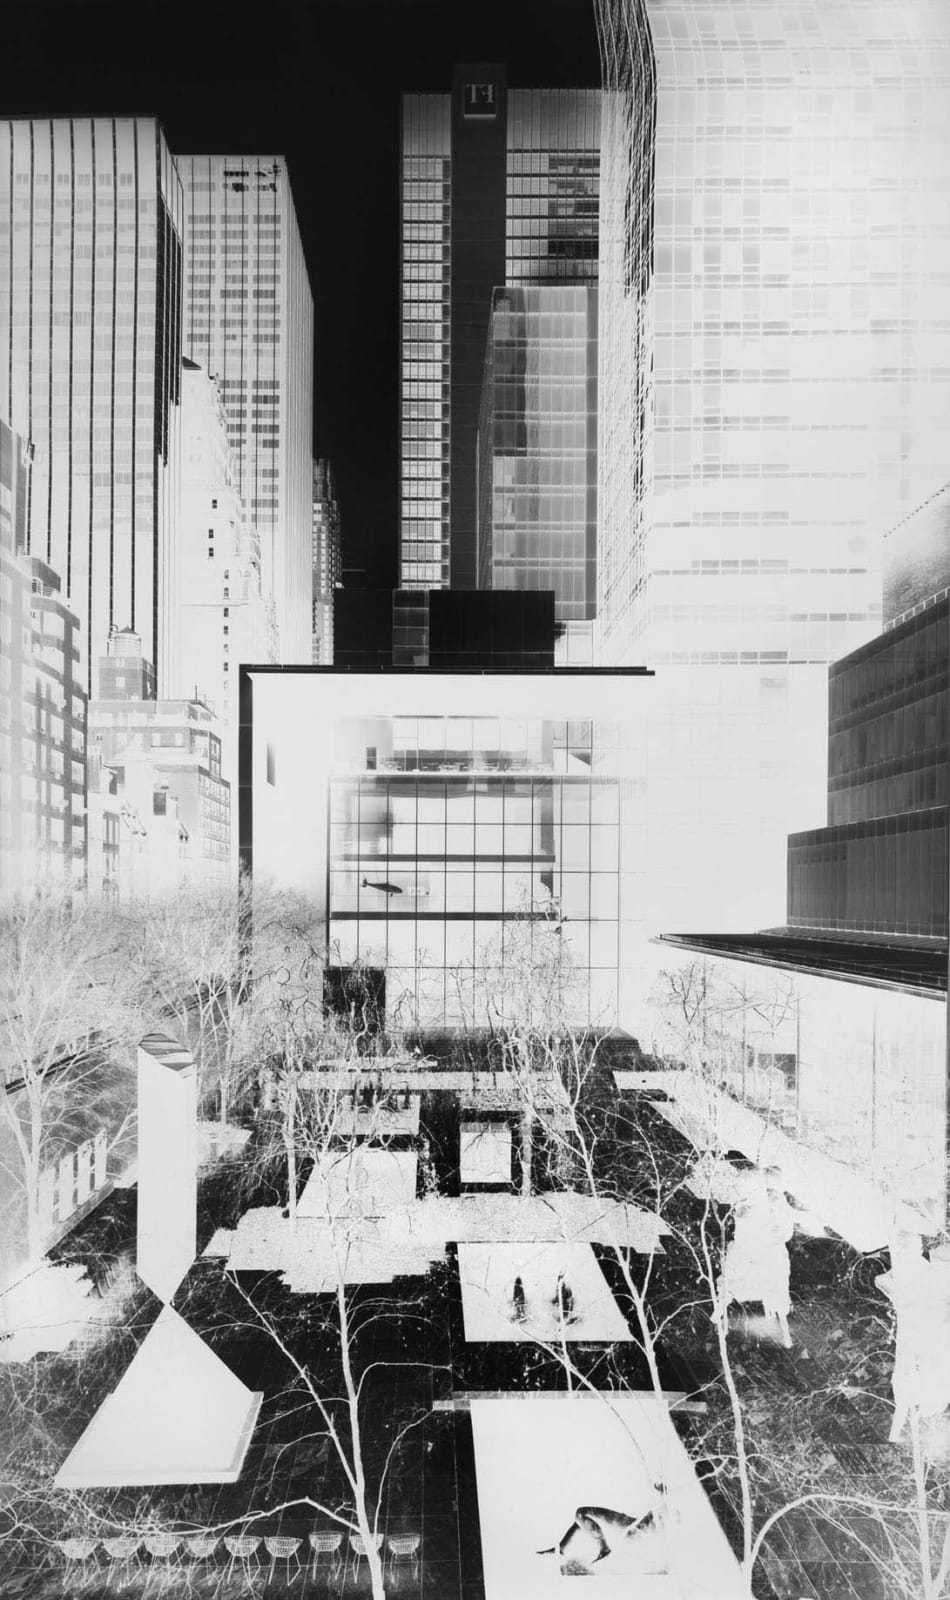 Vera Lutter The Museum of Modern Art, V: April 18 inverse black and white image of MoMA sculpture garden